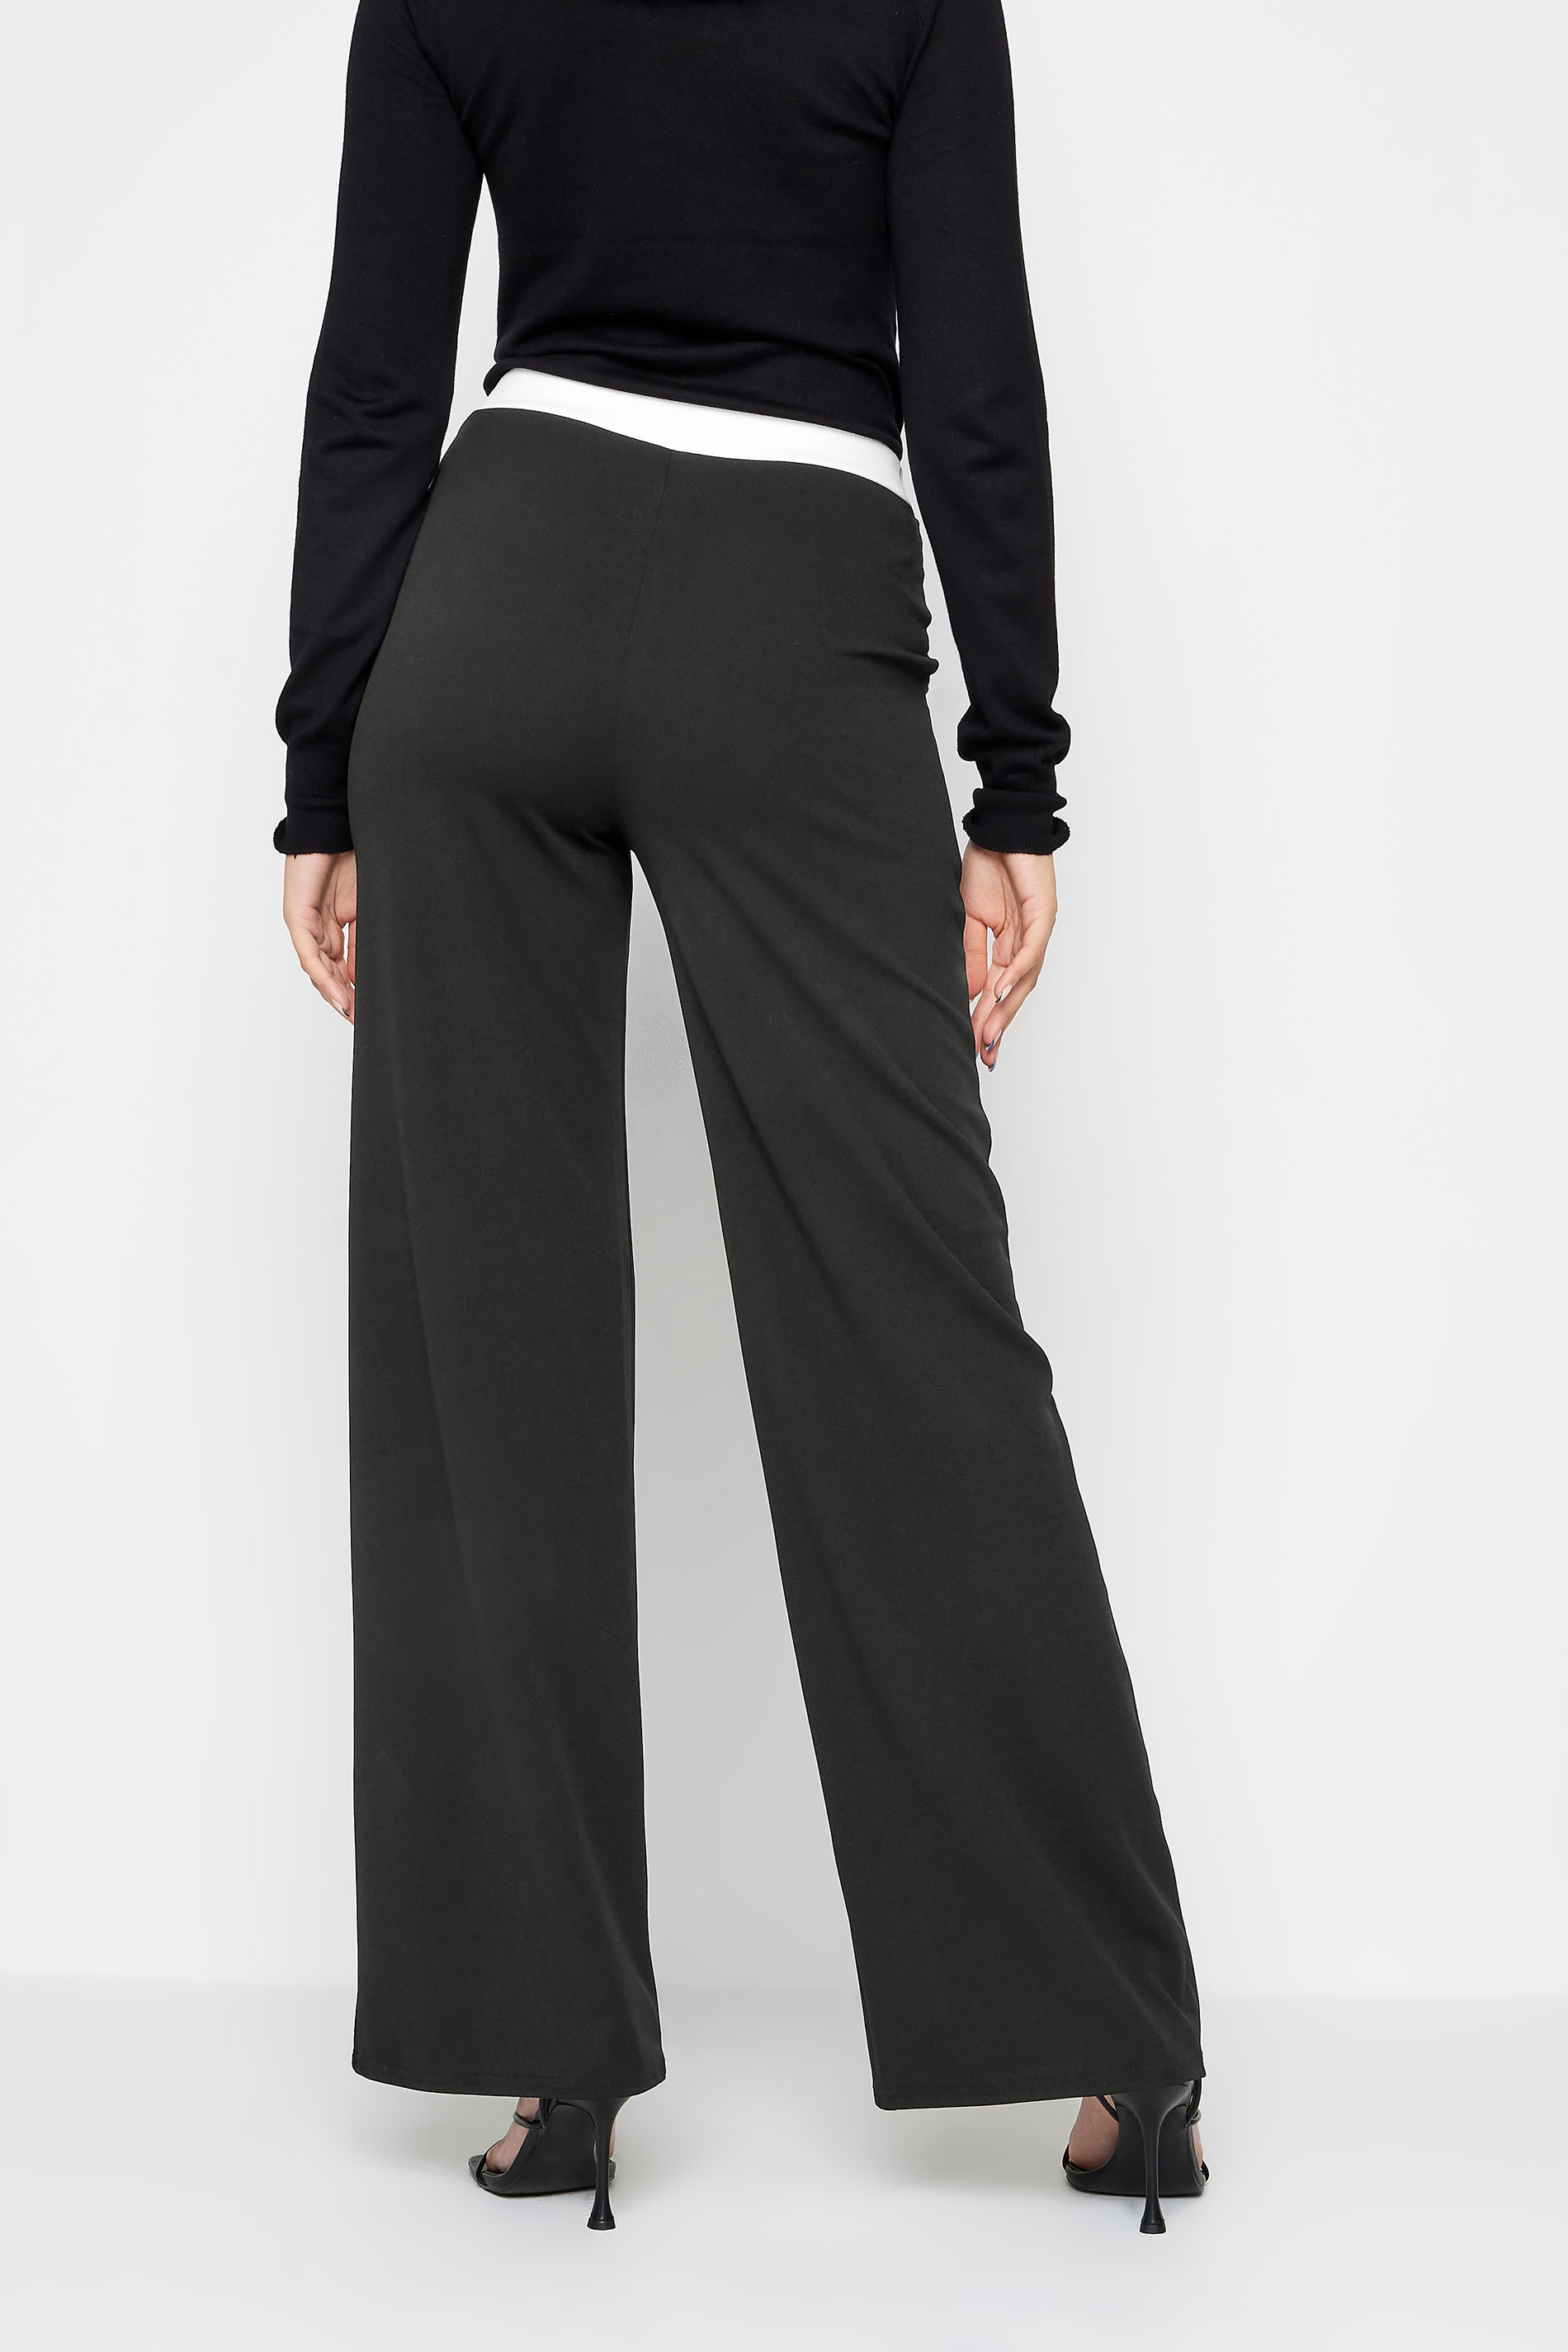 LTS Tall Black & White Contrast Waistband Wide Leg Trousers | Long Tall Sally 3